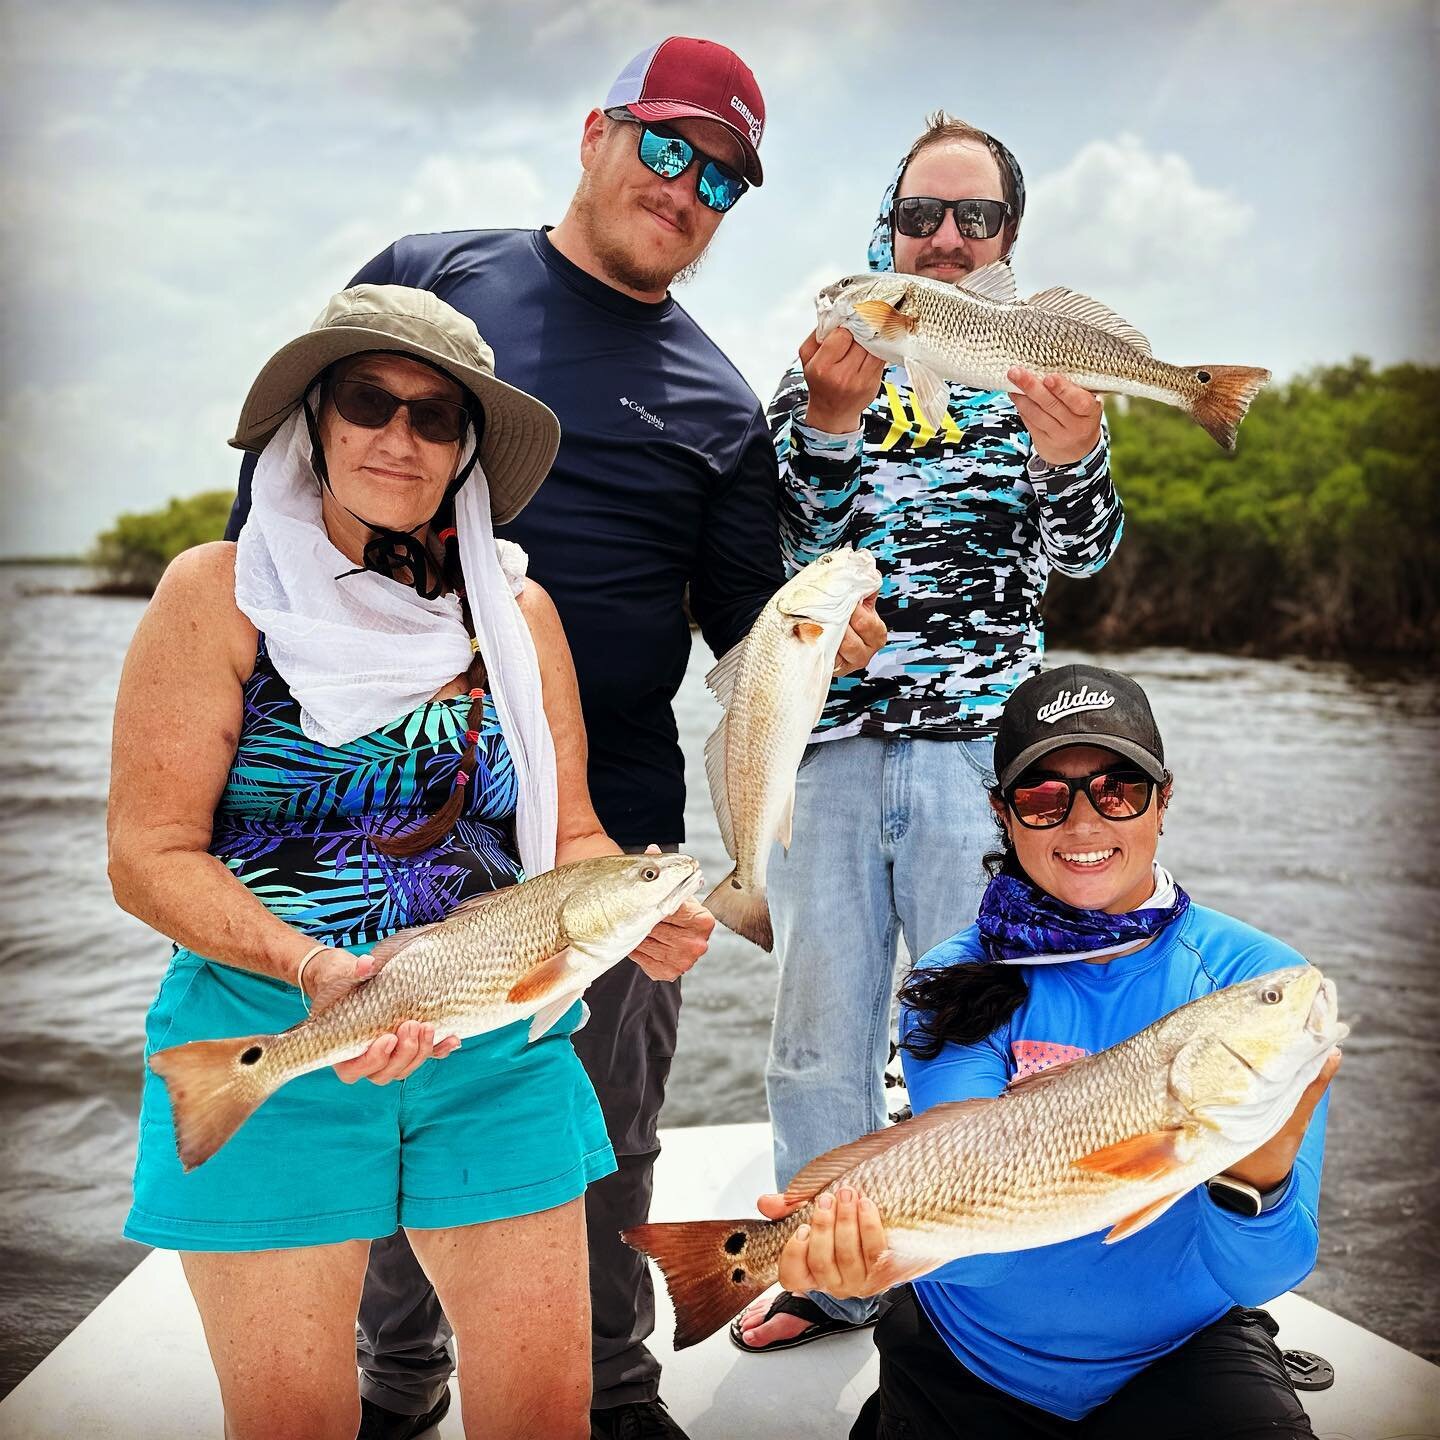 Sam and his crew with their fish this afternoon #crystalriver #captjameskerr
#crystalriverflatsfishing #fishing #naturecoast #seatrout #snook  #visitflorida #sodiumfishinggear #crystalriverfishing #inshorefishing #redfish 

www.crystalriverflatsfishi